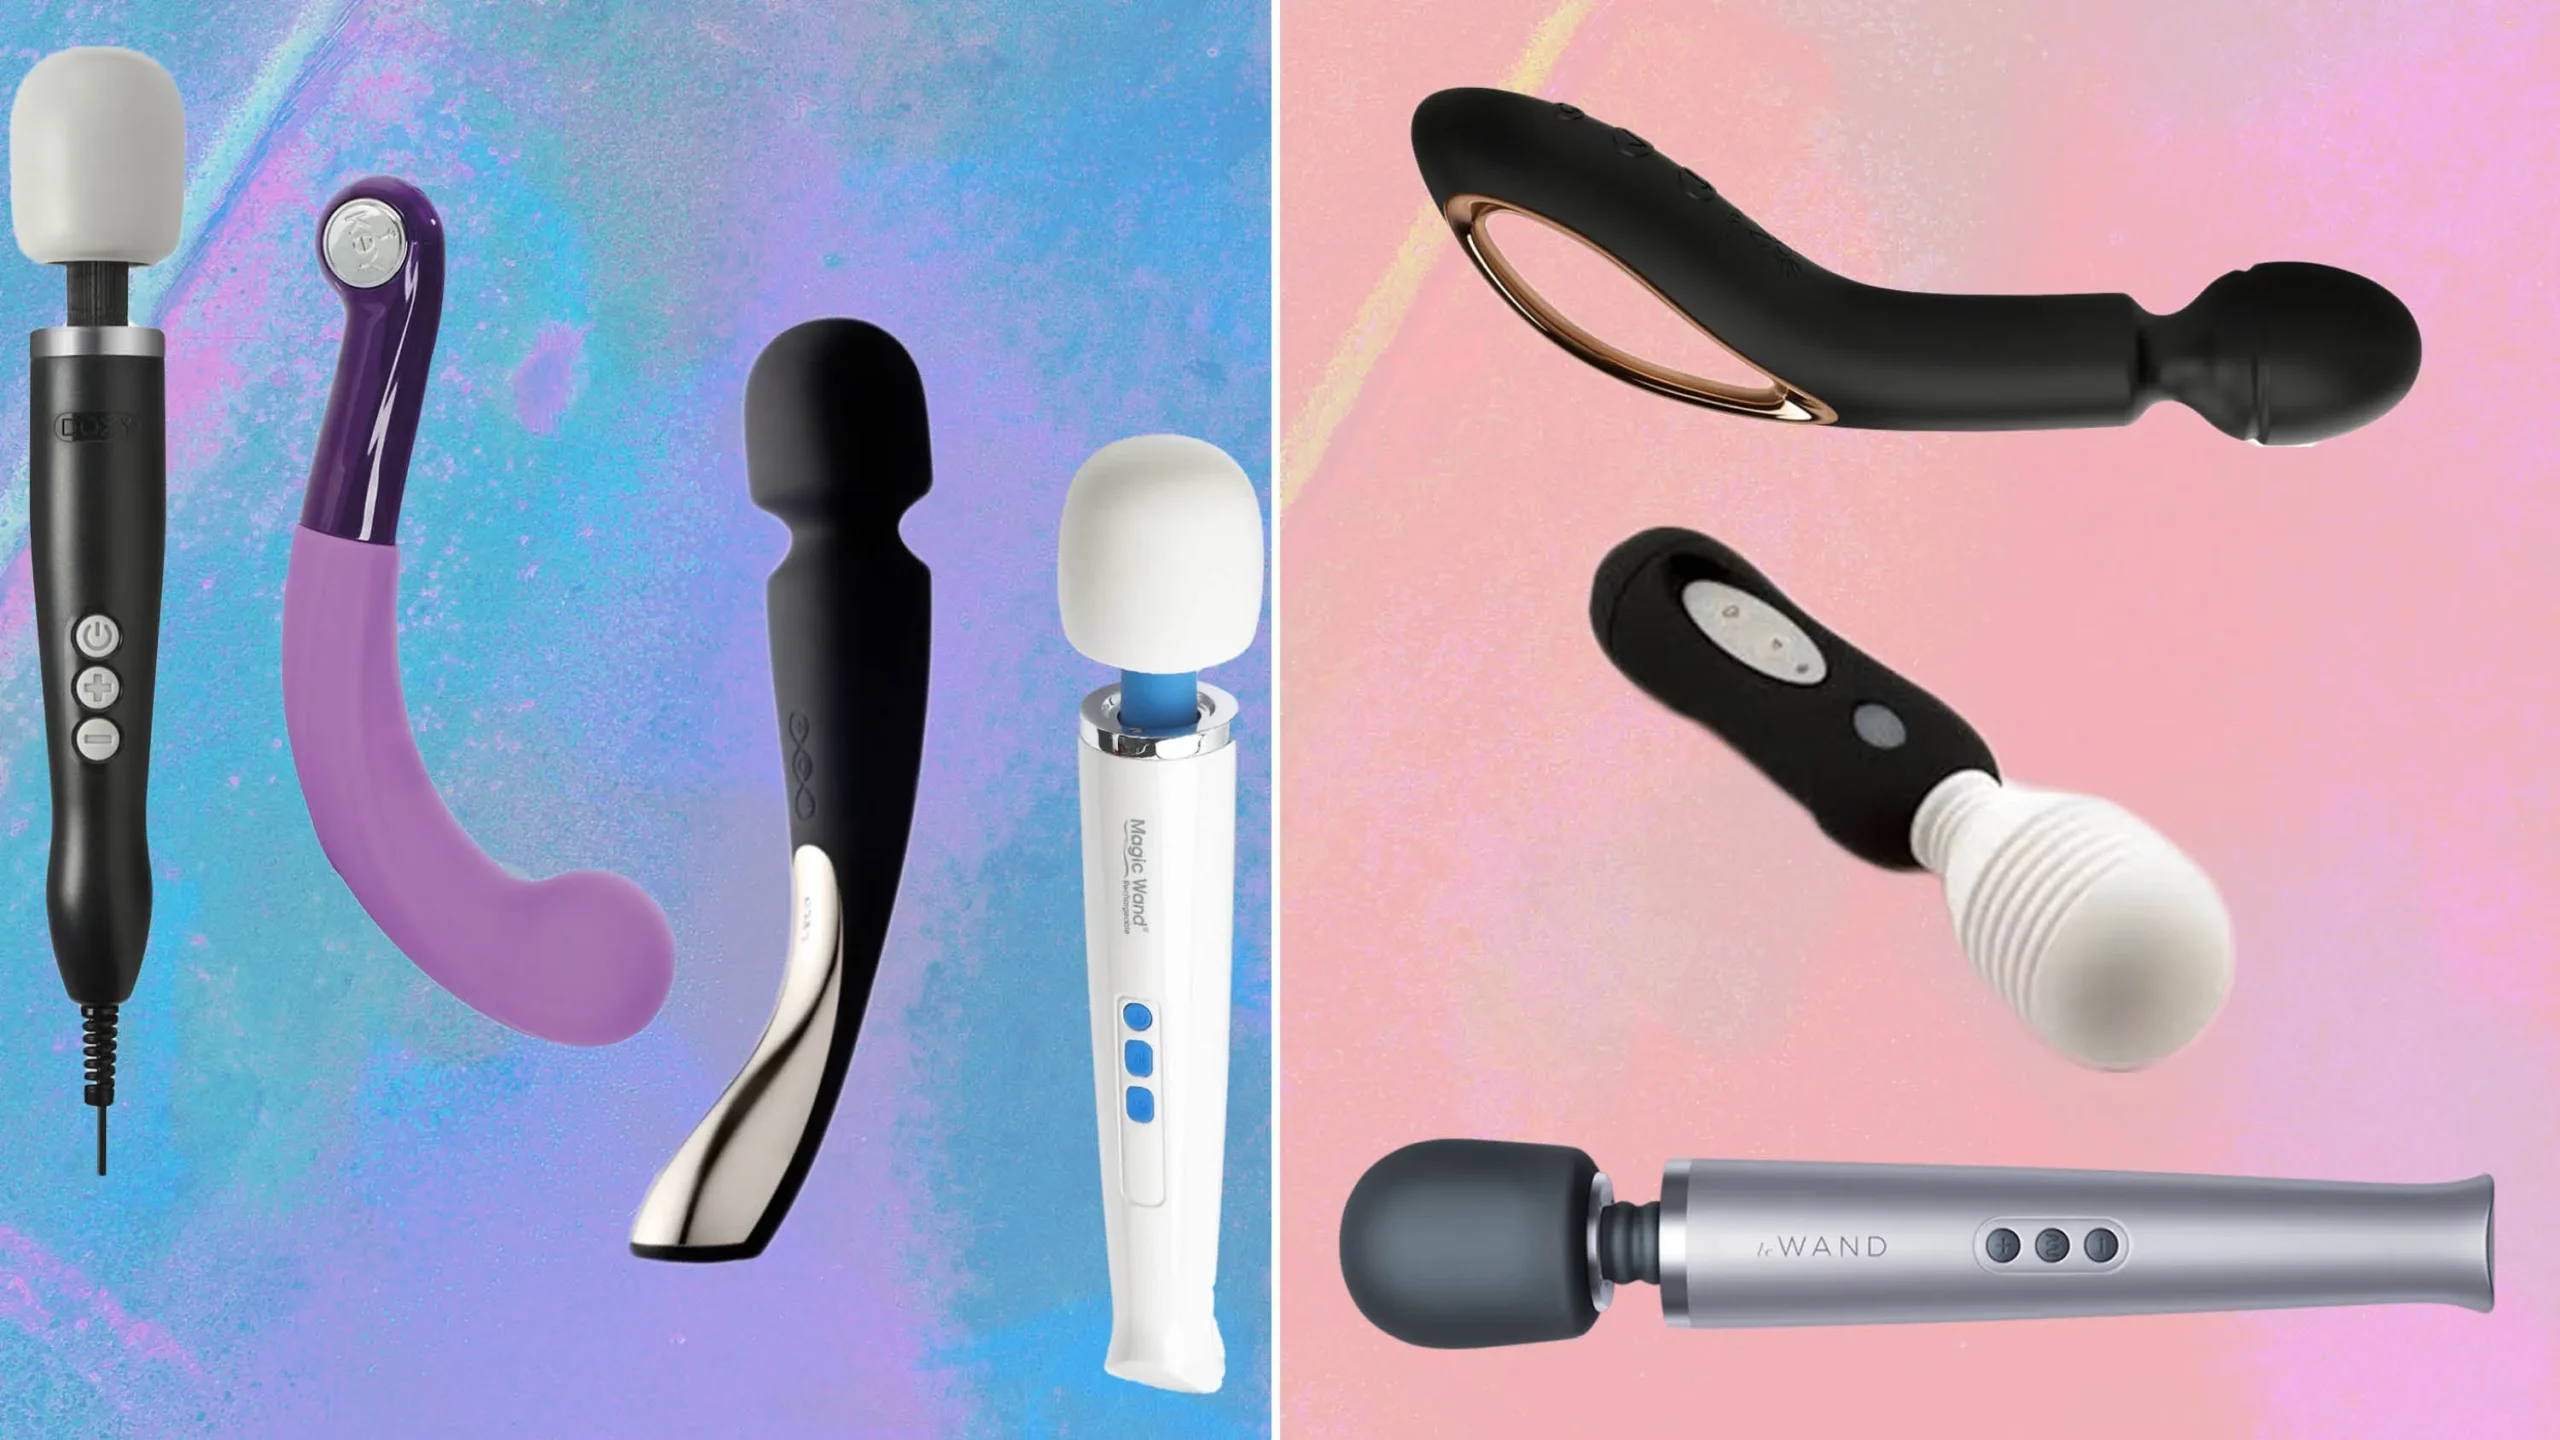 Finding the Right Vibrator for You